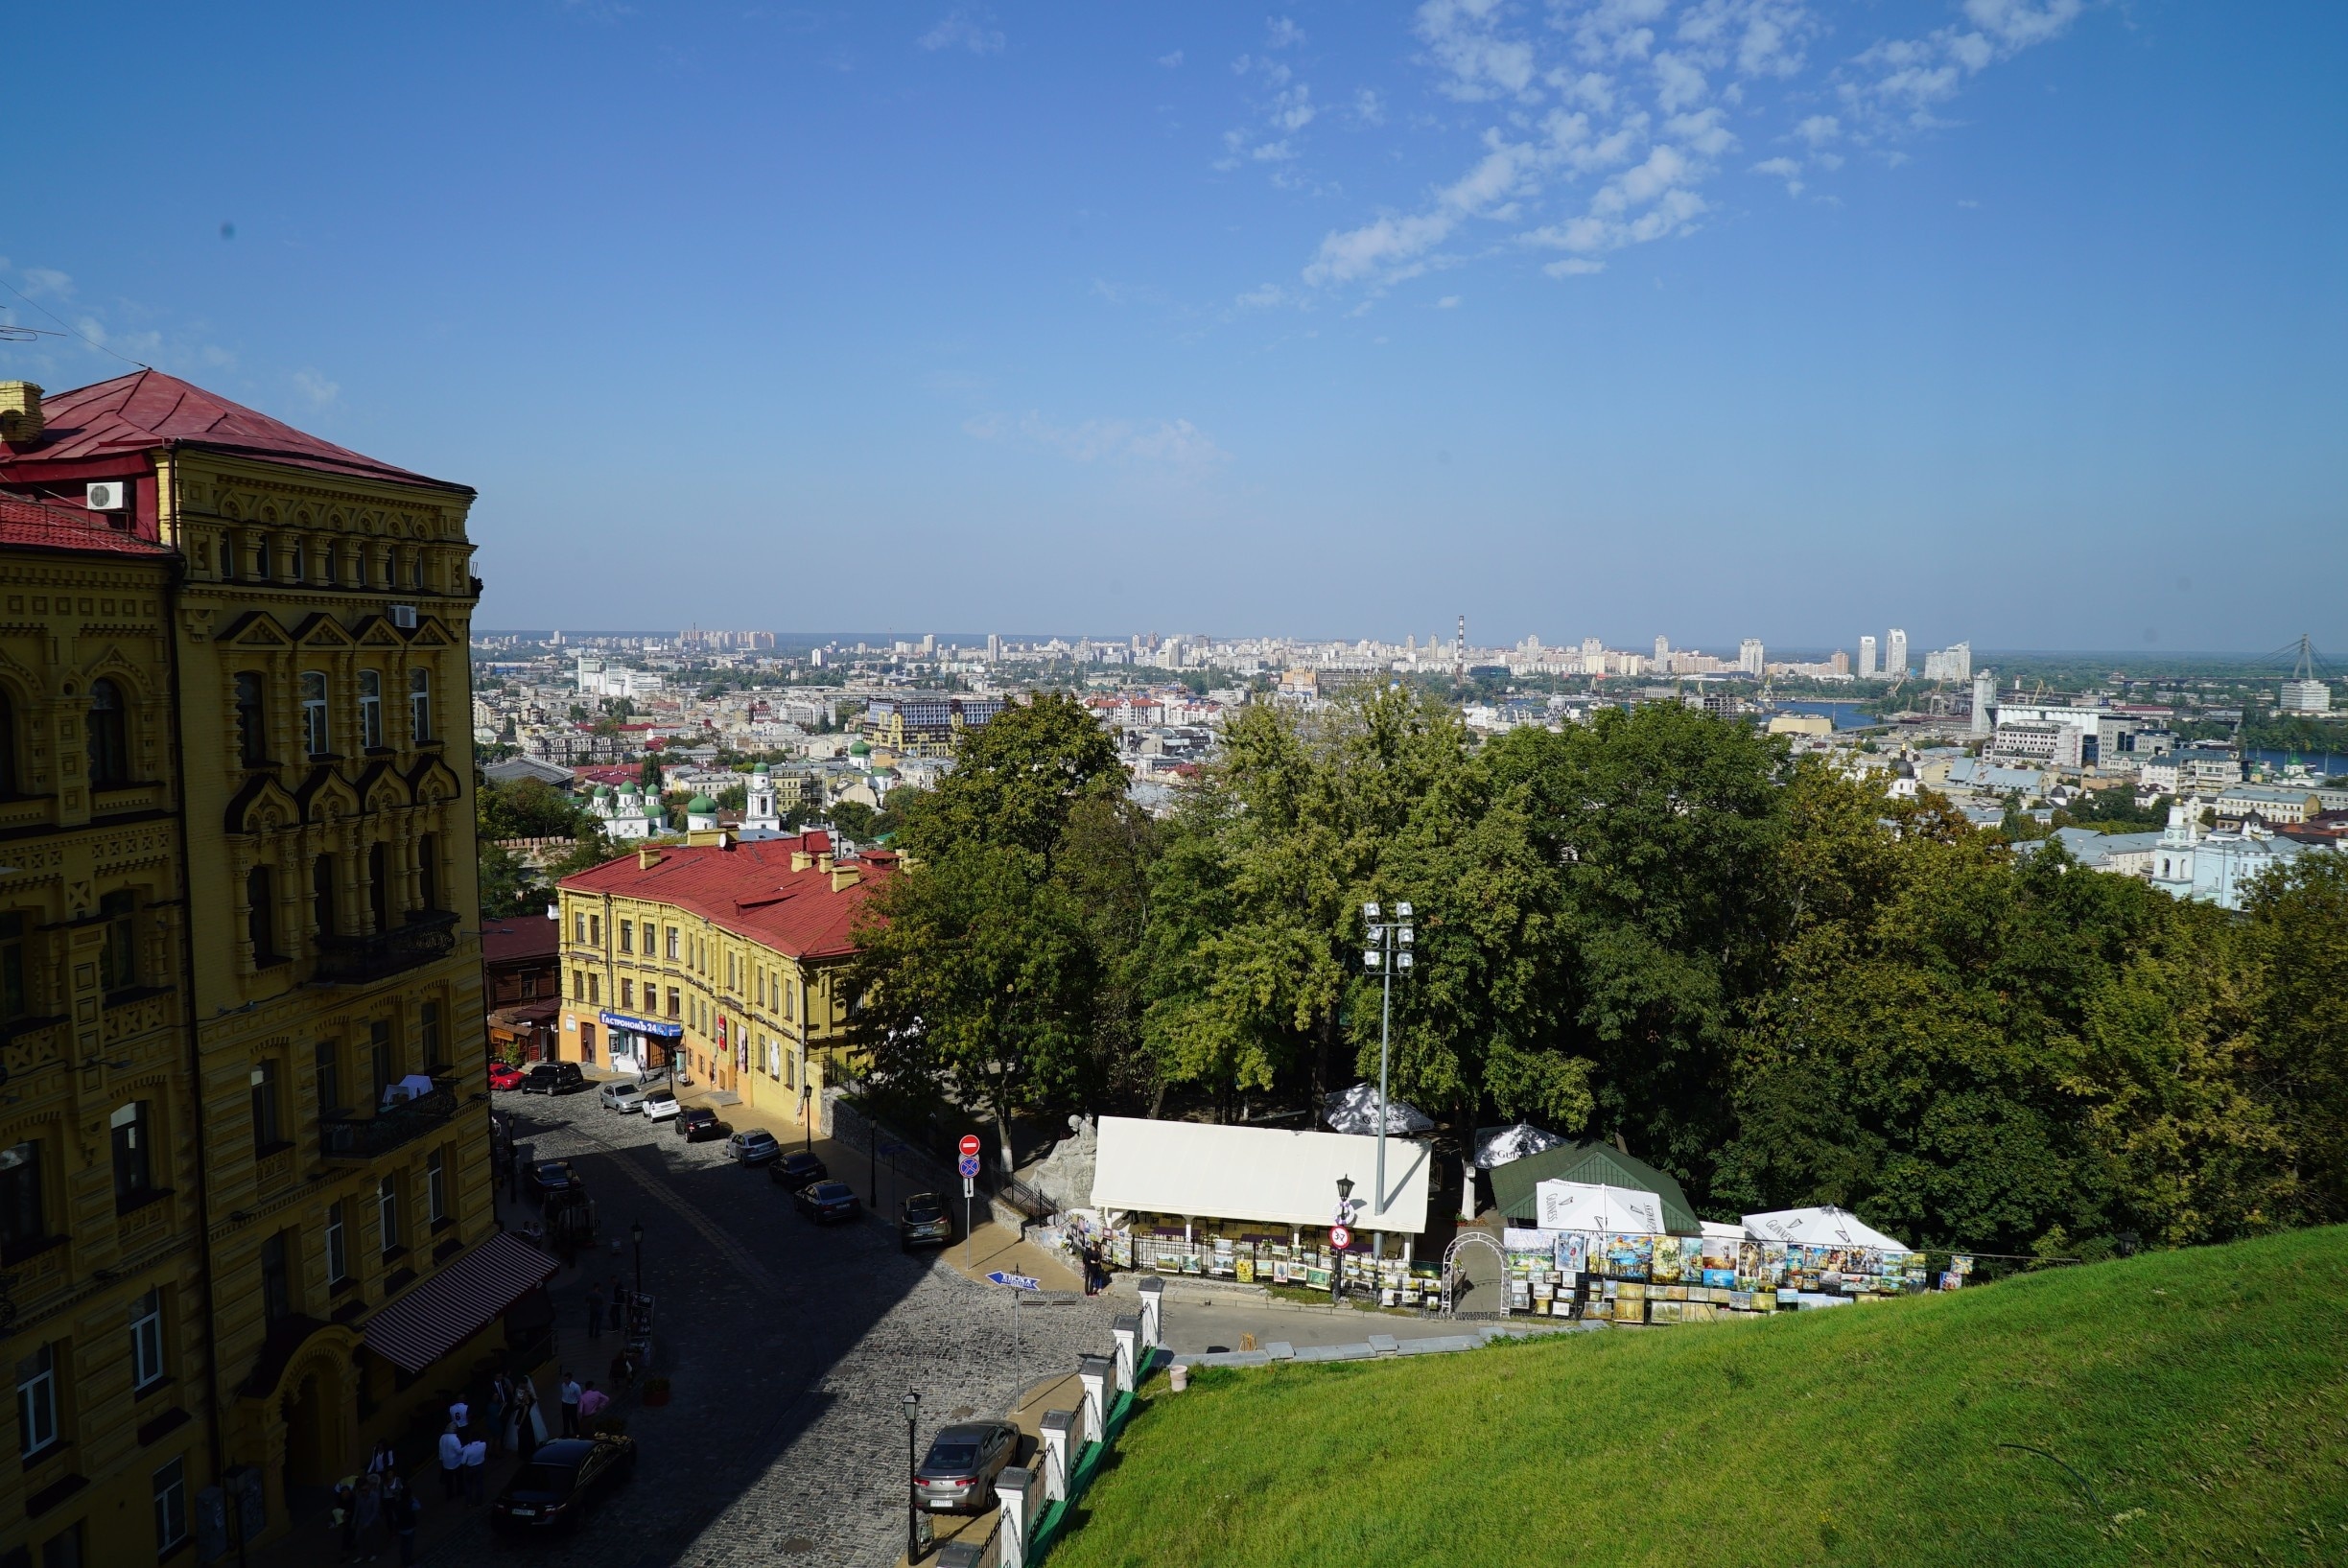 The view from St. Sophia's Cathedral looking East at part of the city of Kiev.